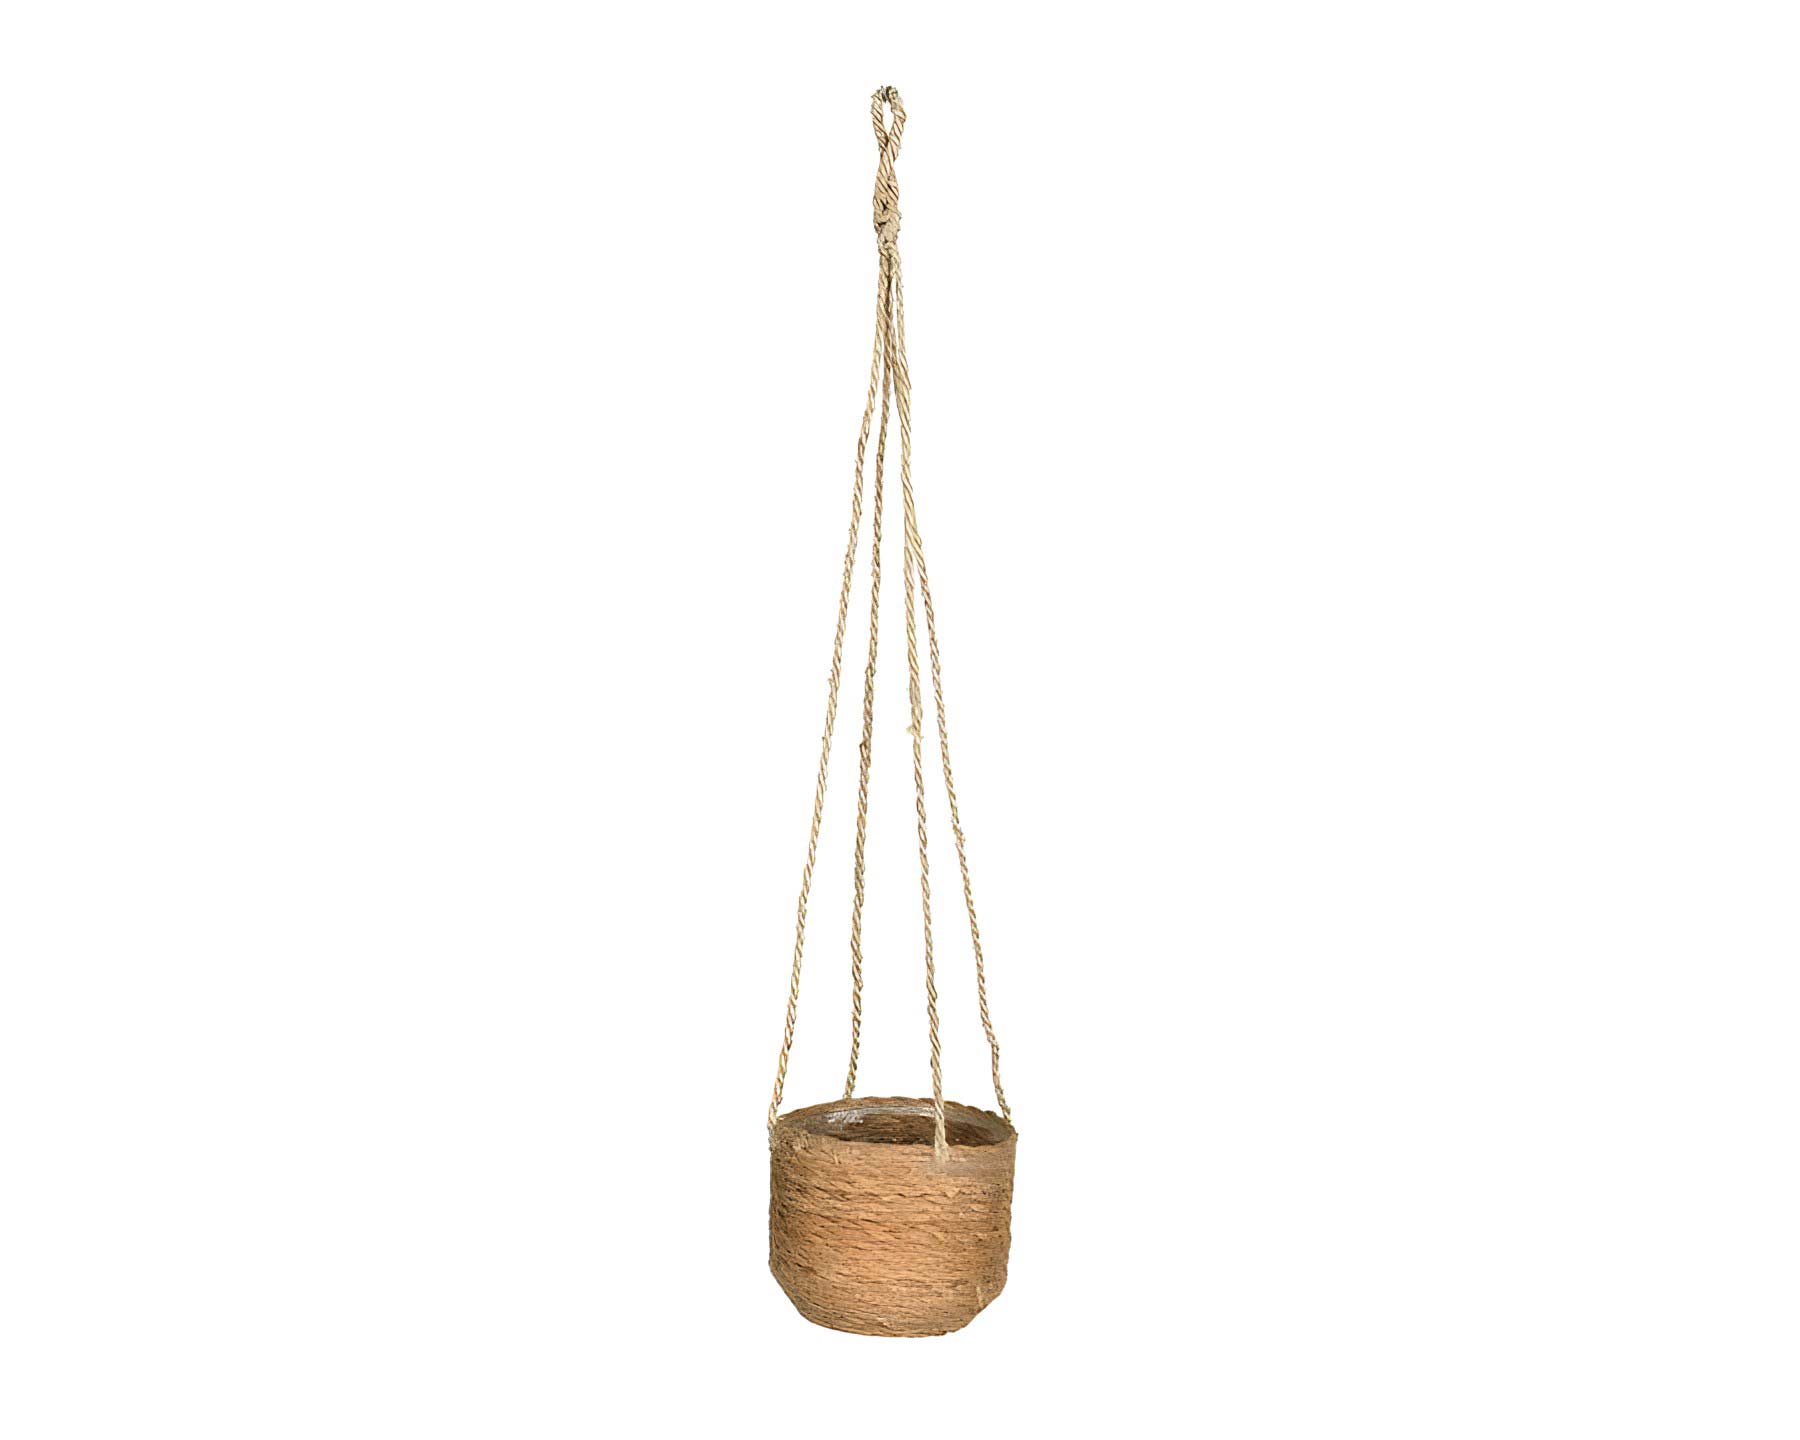 Hanging pot - Hanging cords made from jute and the planter is made of seagrass